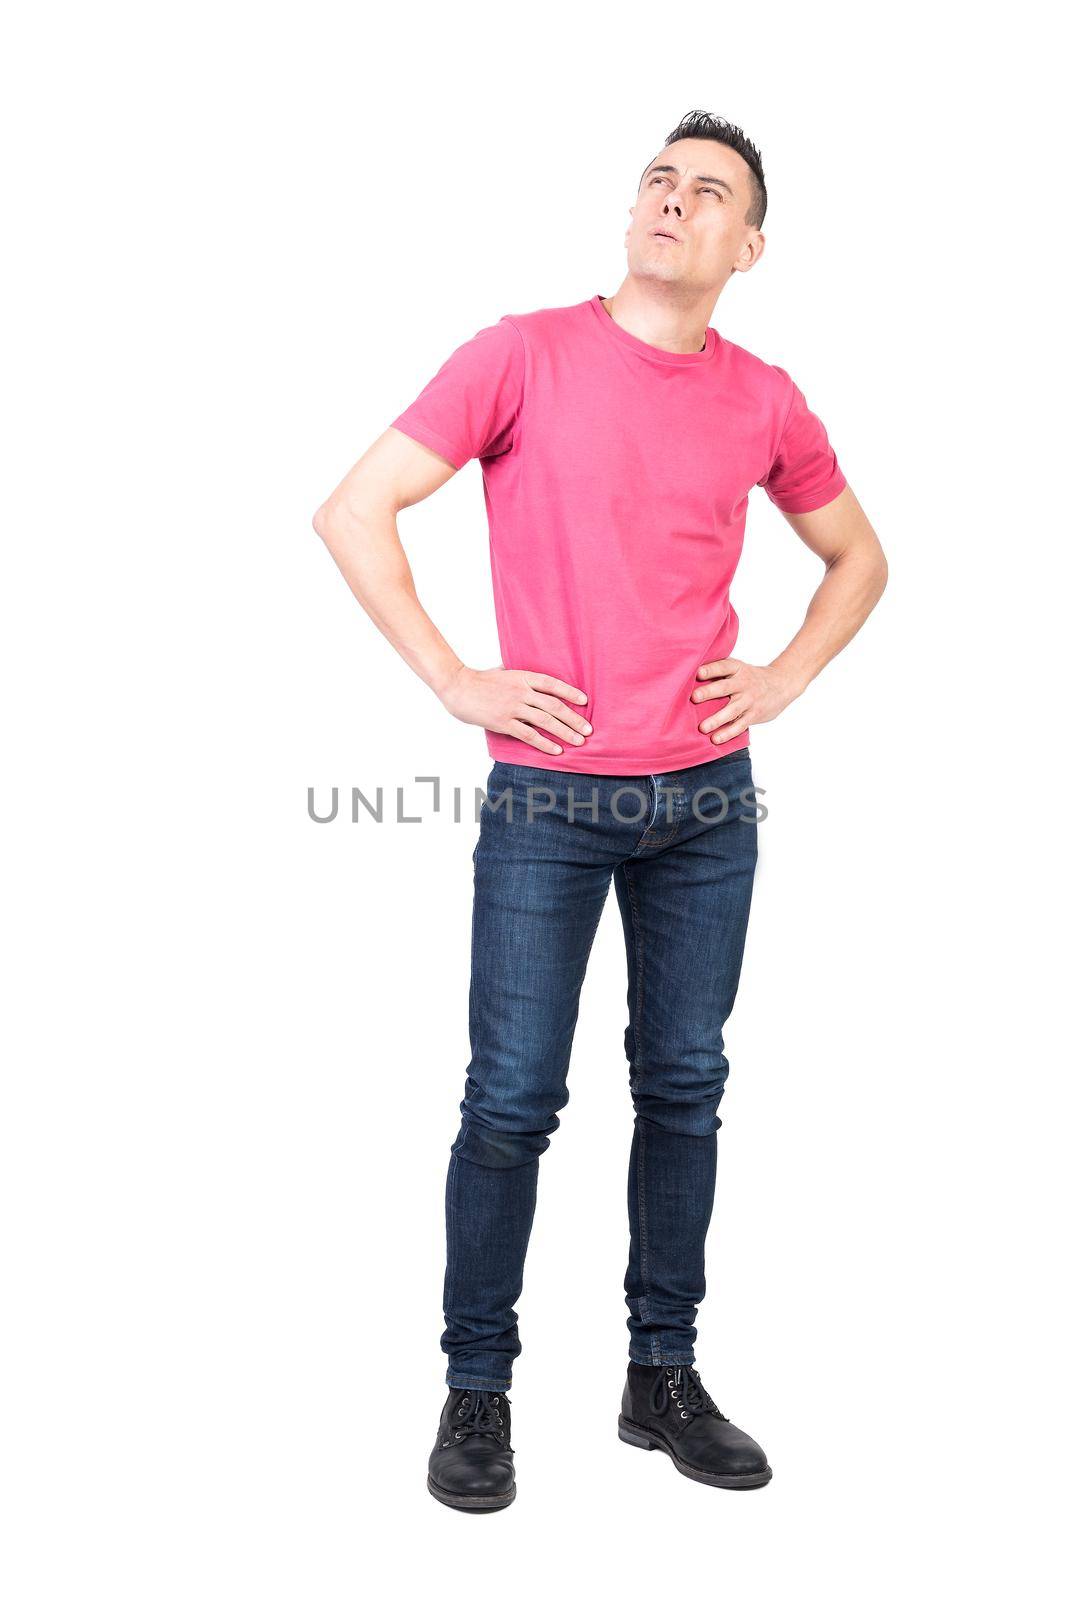 Full body suspicious male holding hands on waist and looking up while pondering over problem against white background